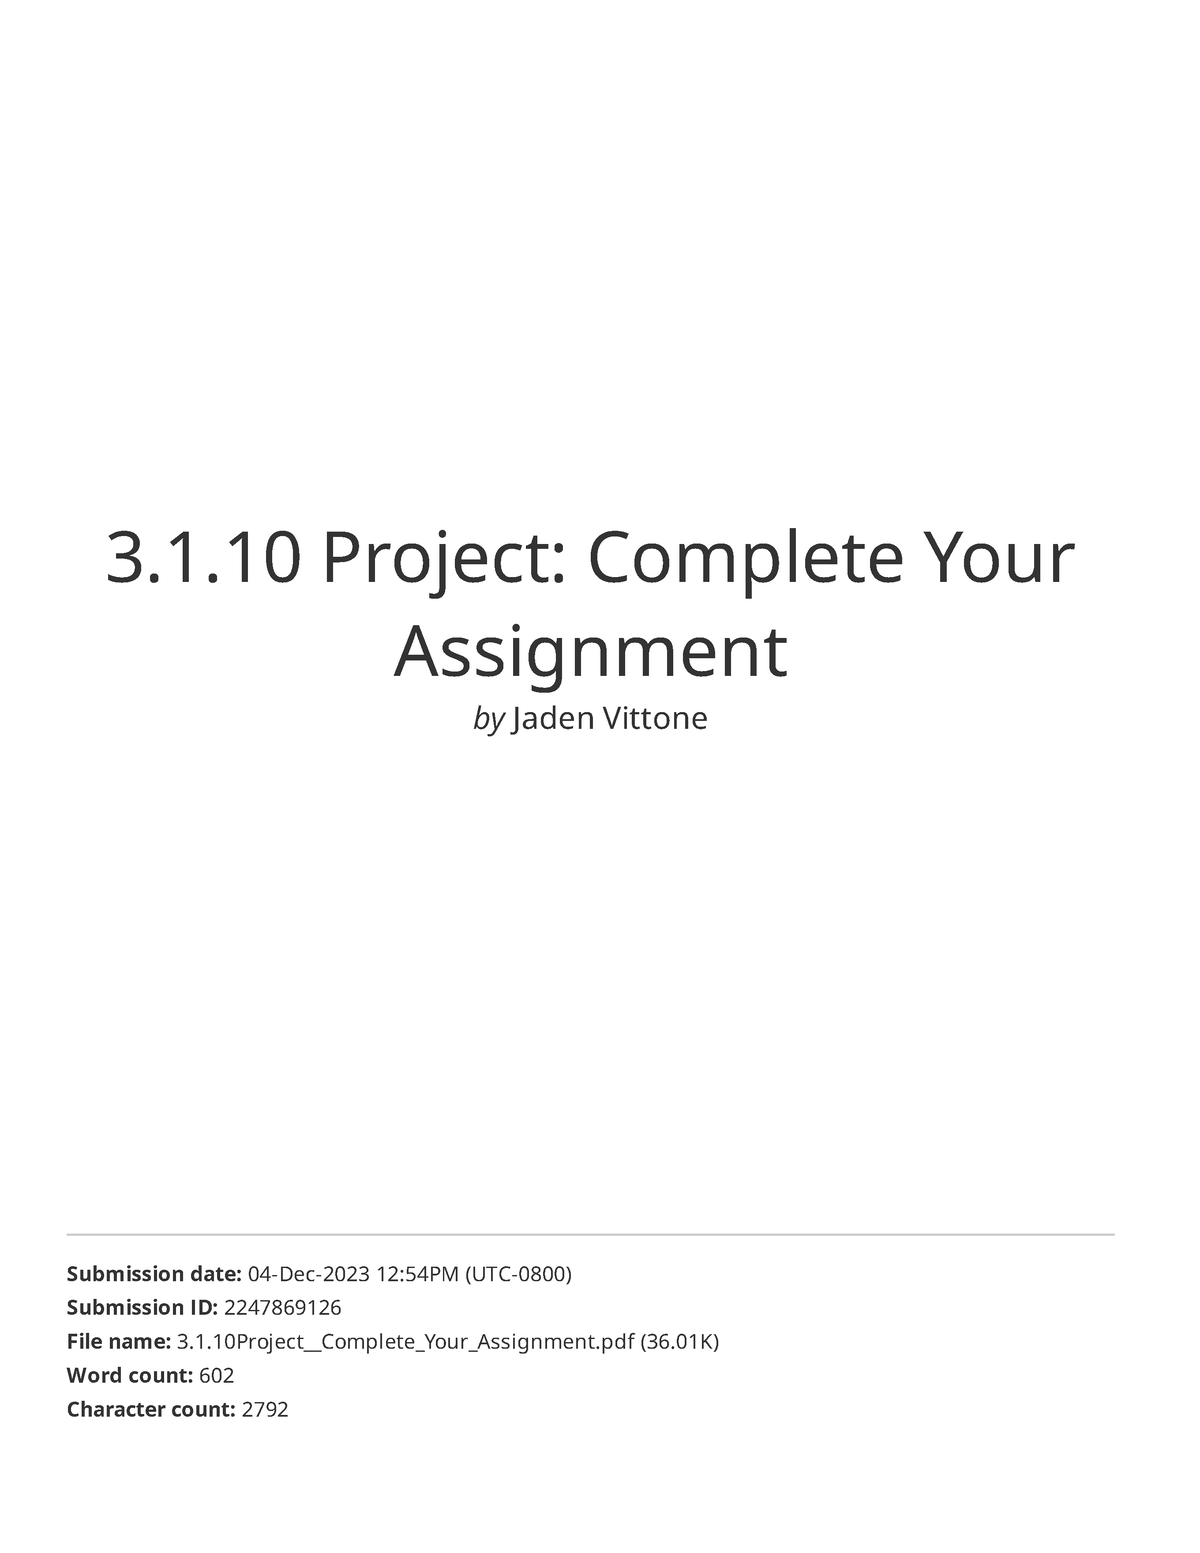 4.1.10 project complete your assignment